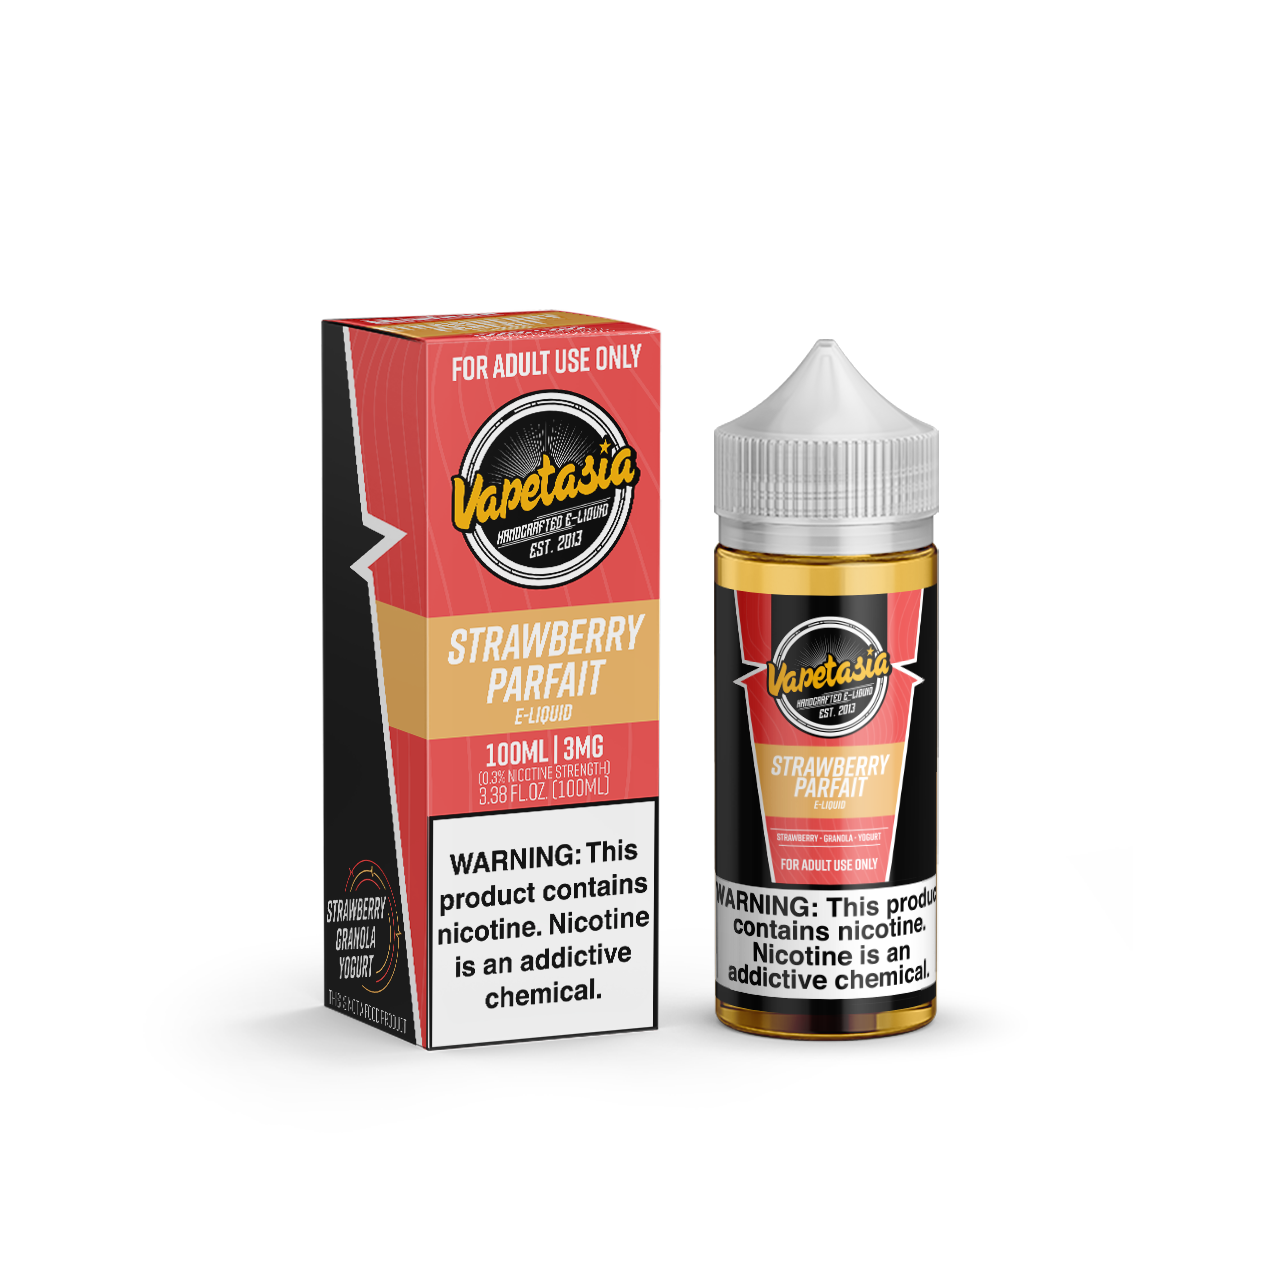 Strawberry Parfait by Vapetasia Series 100mL with Packaging